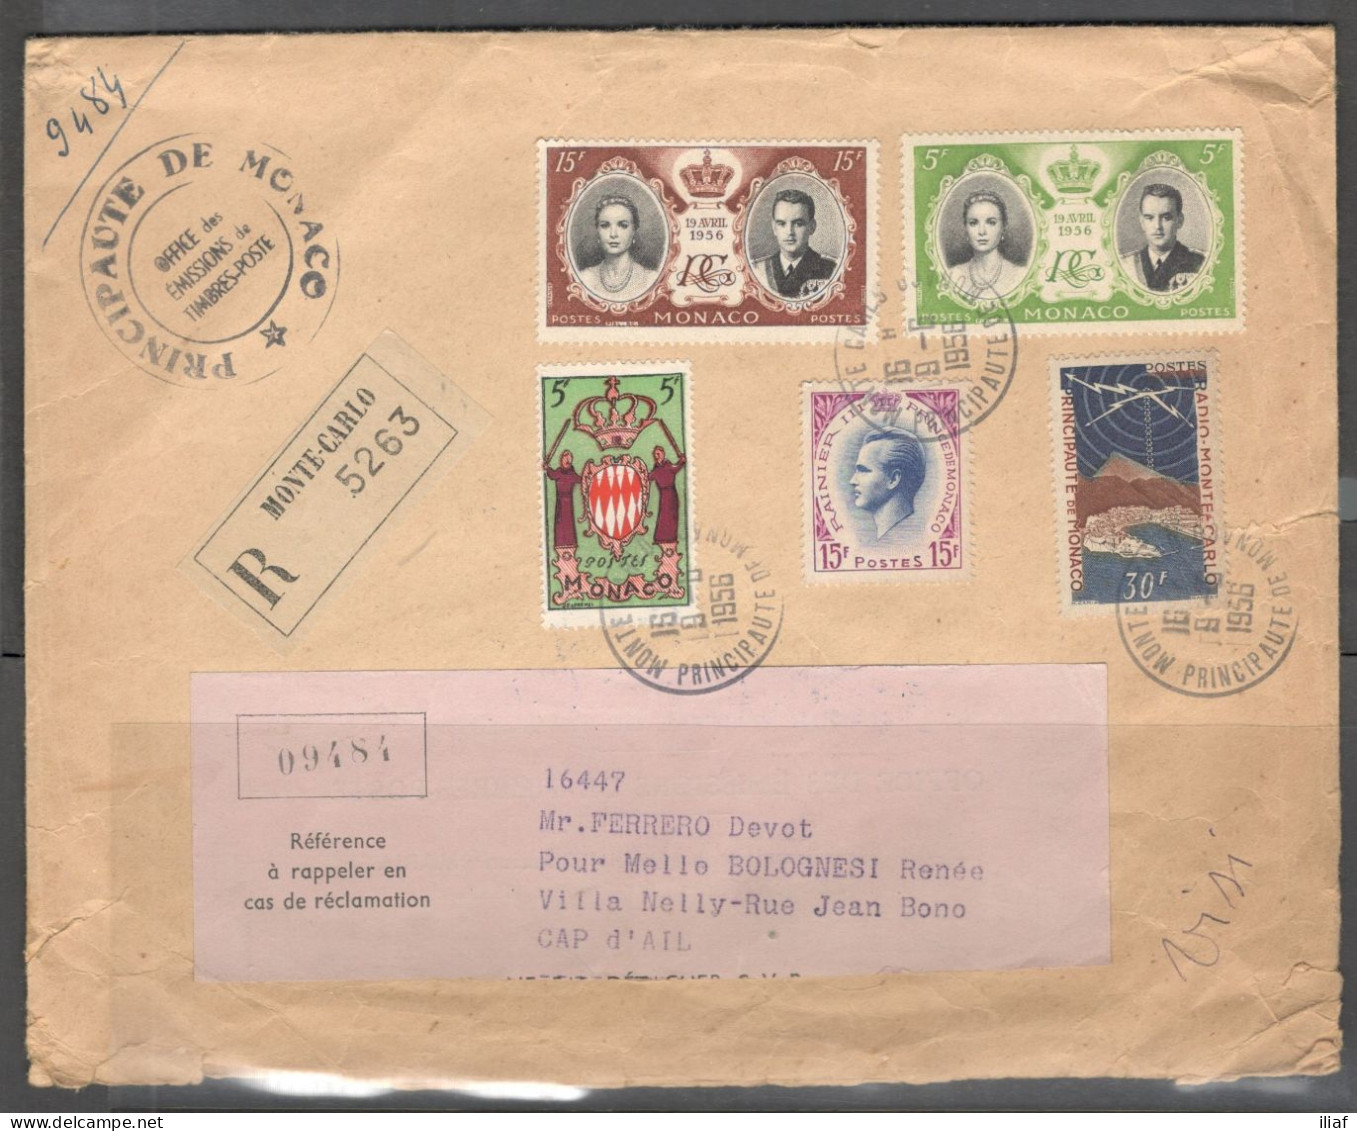 Monaco. Stamps Sc. 280, 318, 337, 369-370 On Registered Letter, Sent From Monte-Carlo, Monaco On 9.06.1956 To Cap-d'Ail - Covers & Documents